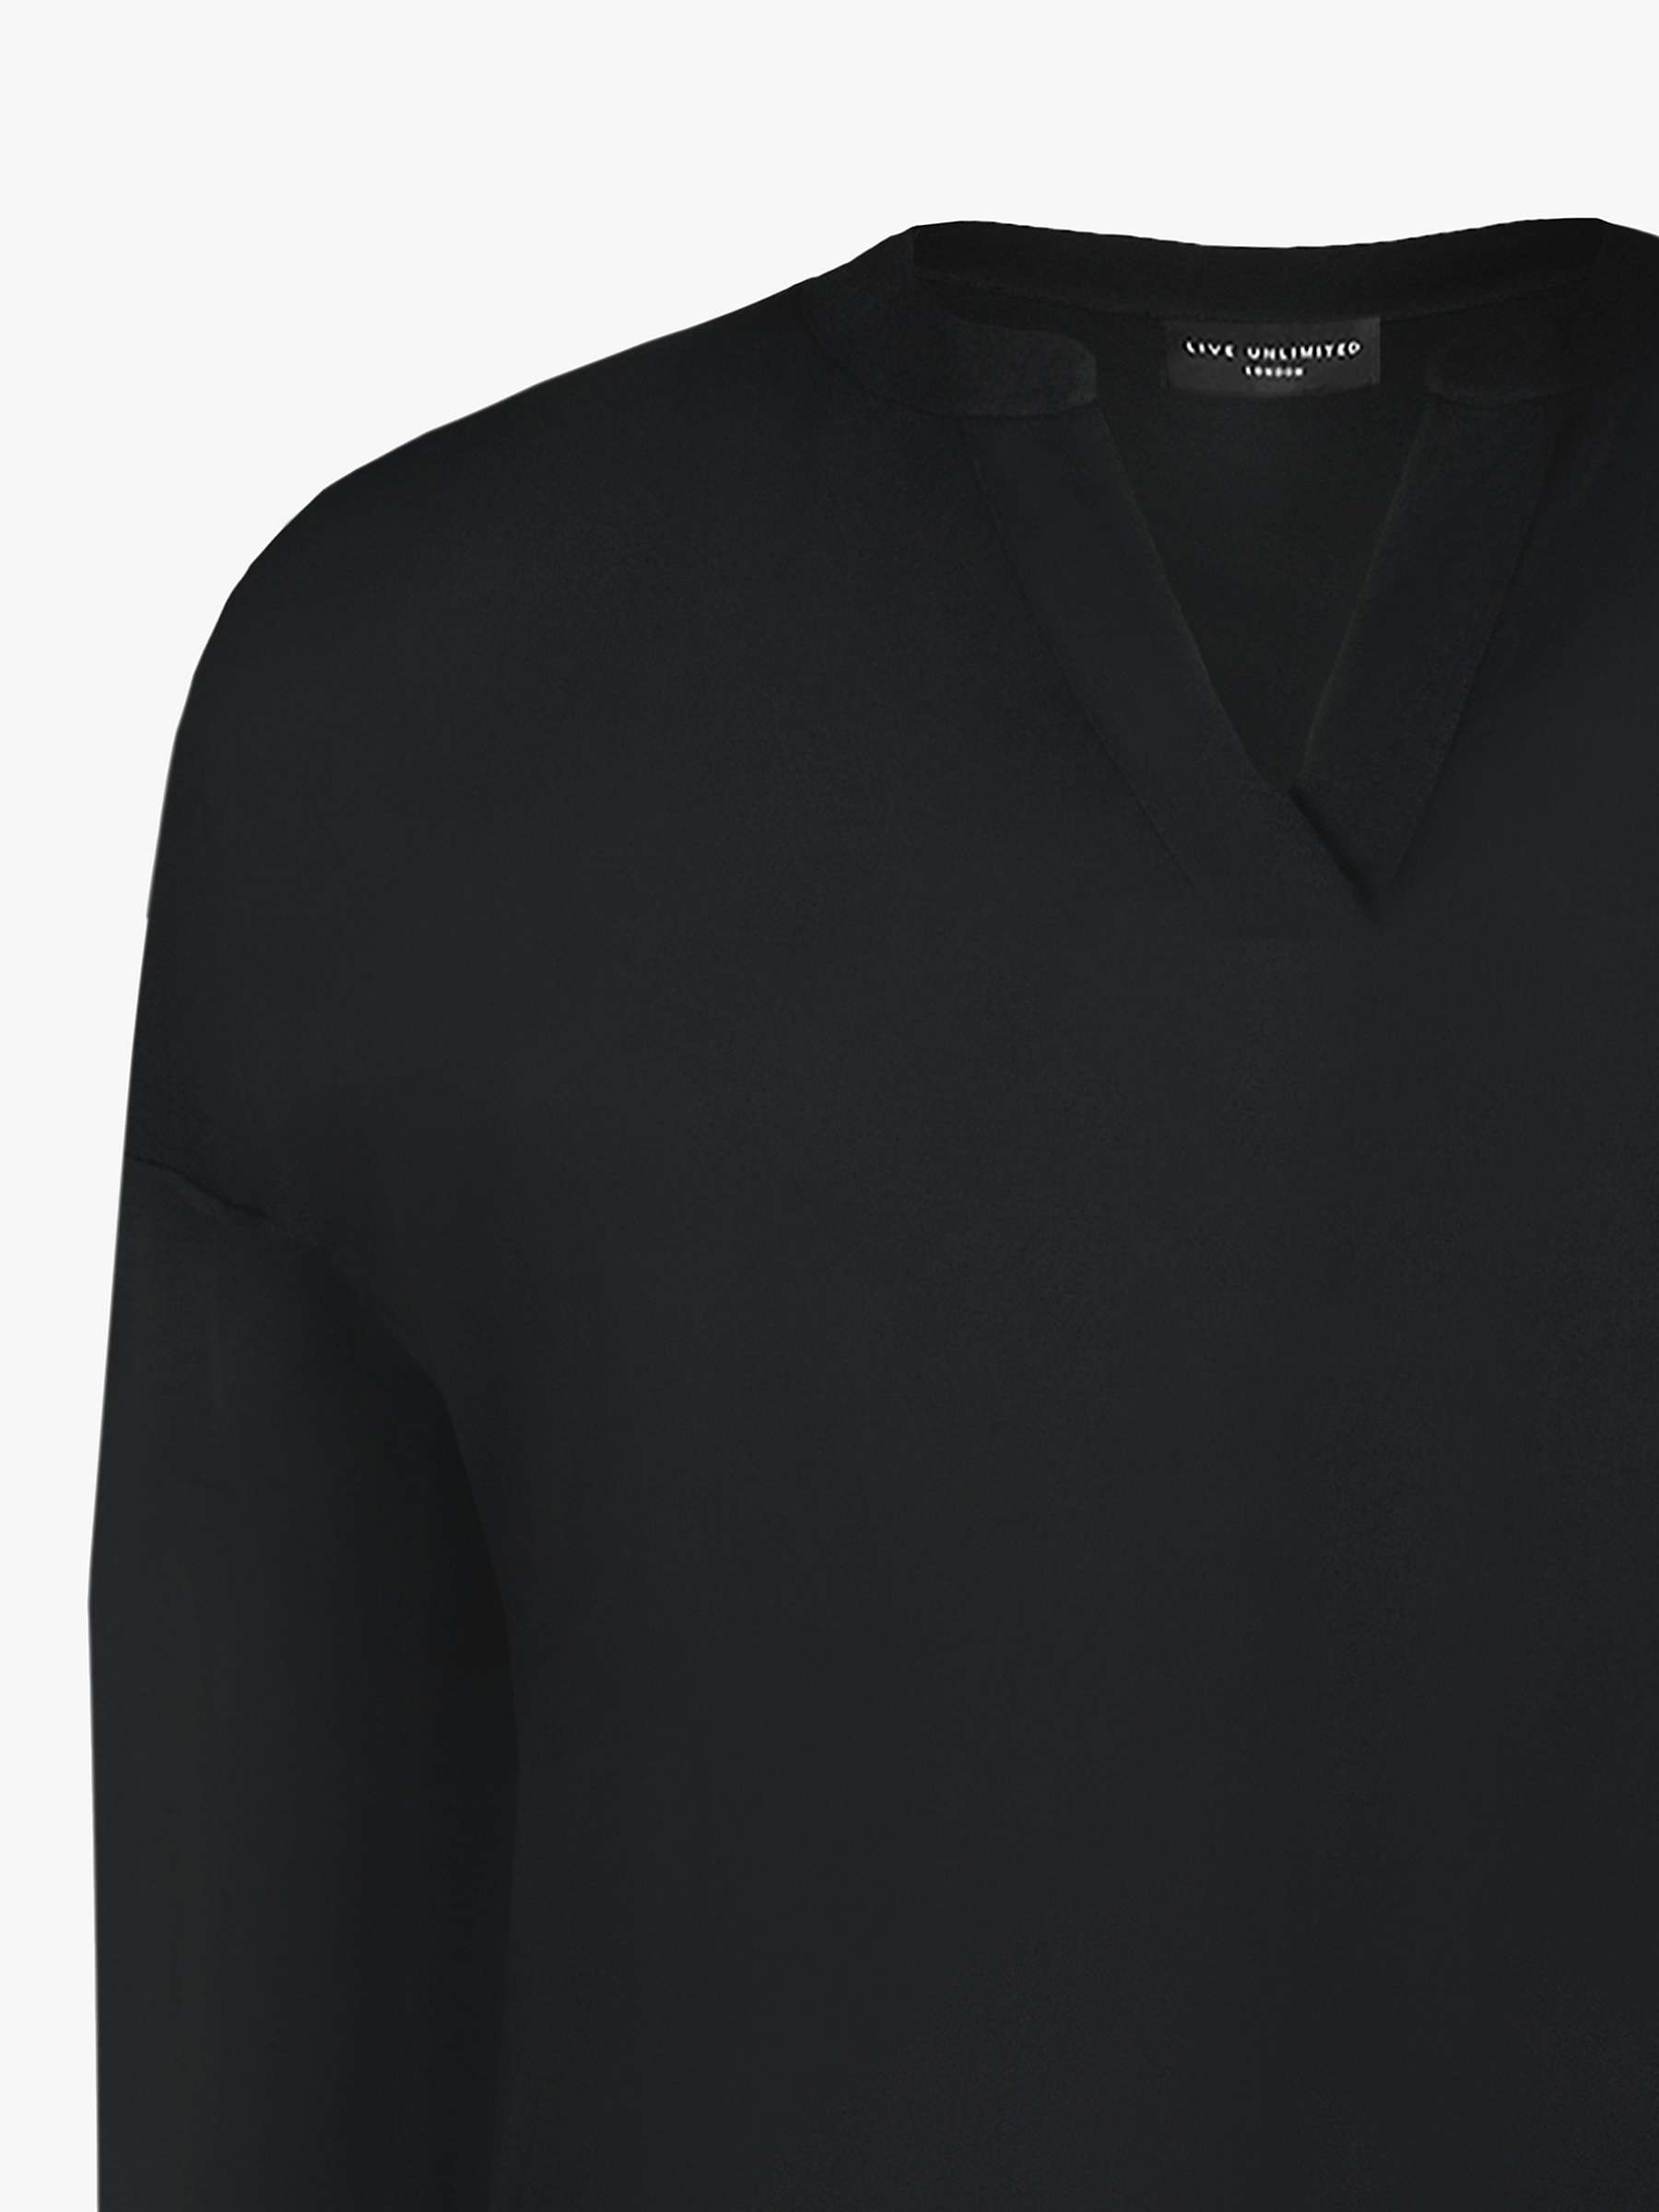 Buy LIVE by Live Unlimited Curve Sustain Back Pleat Shirt, Black Online at johnlewis.com